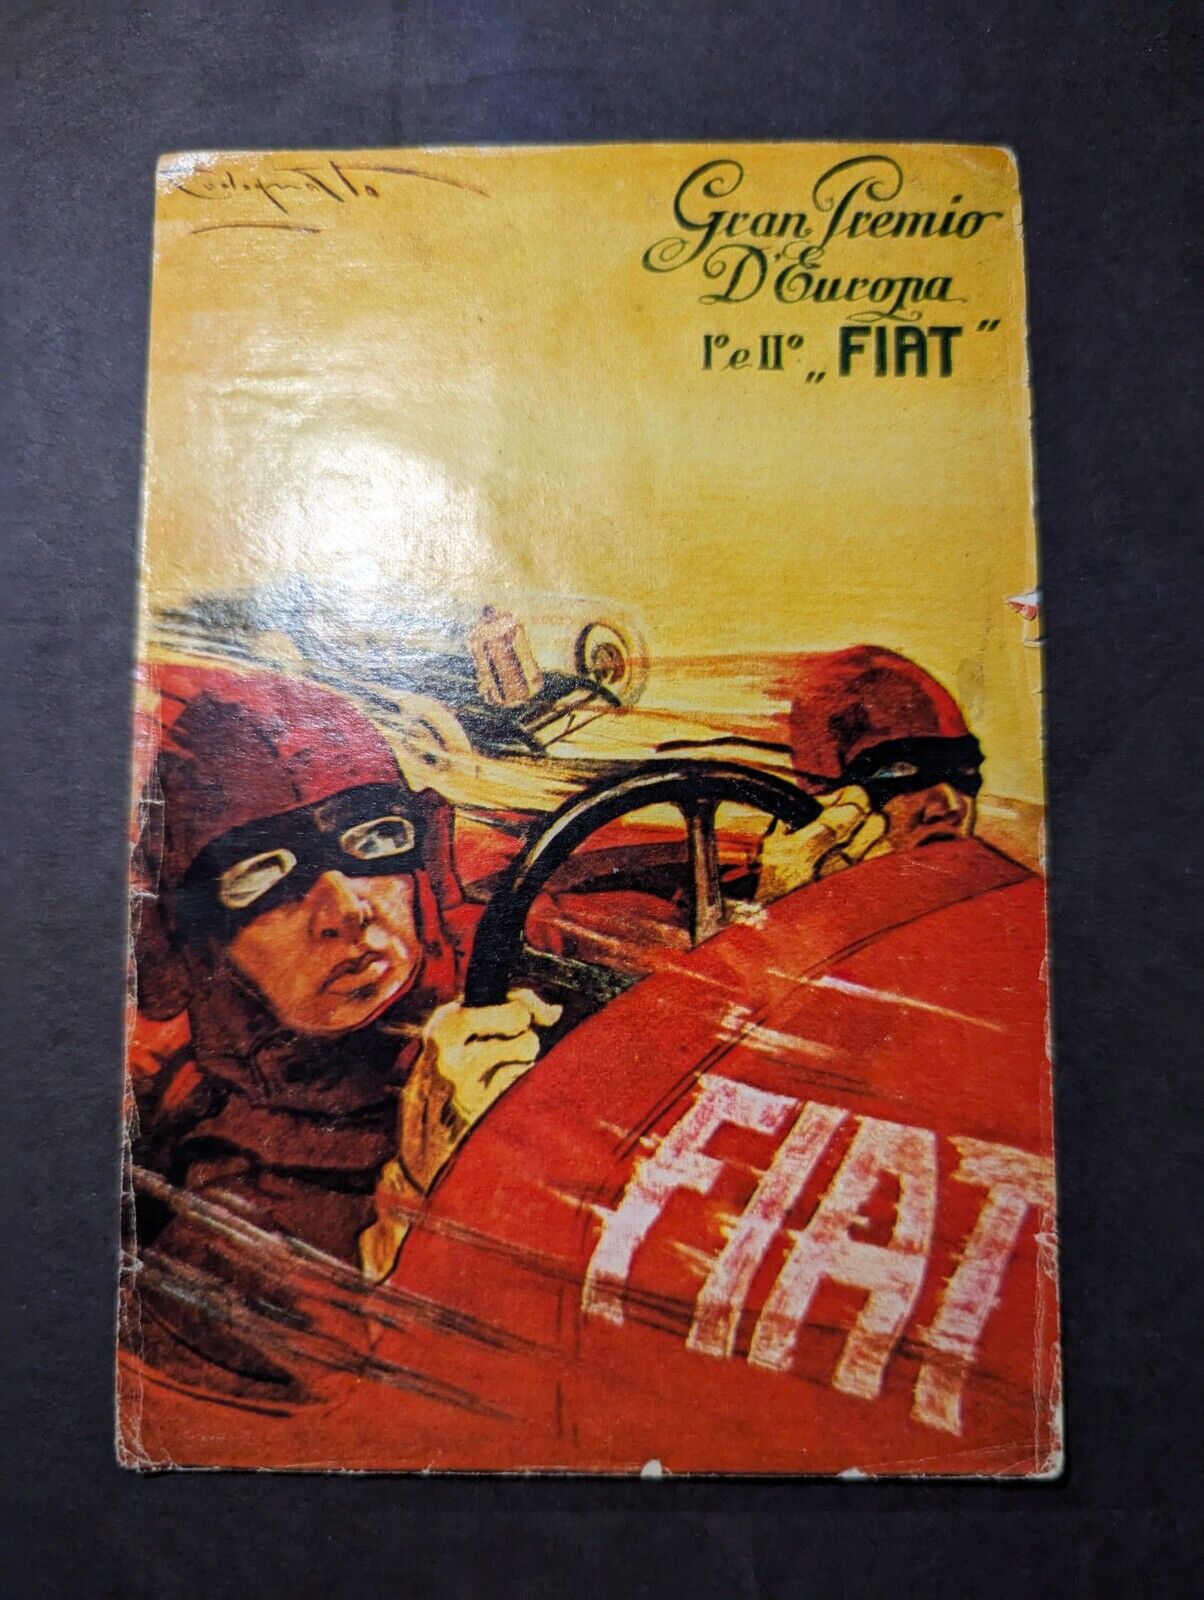 Mint Italy Racing Postcard First and Second Fiat European Grand Prix